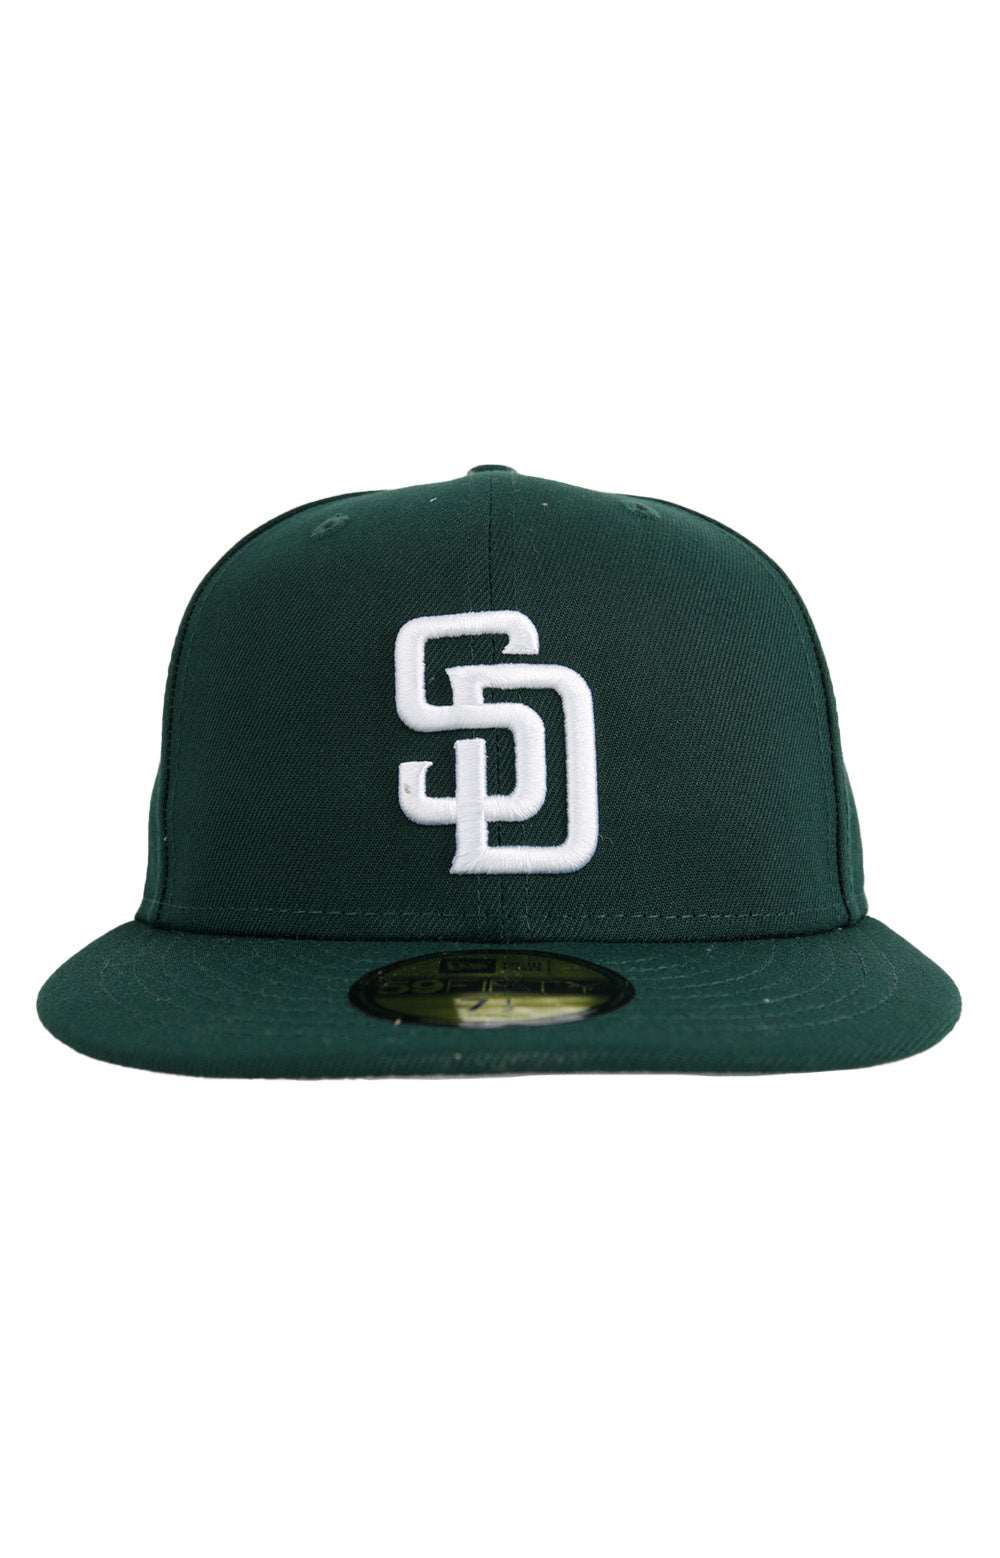 San Diego Padres 59Fifty Fitted Hat - Dark Green